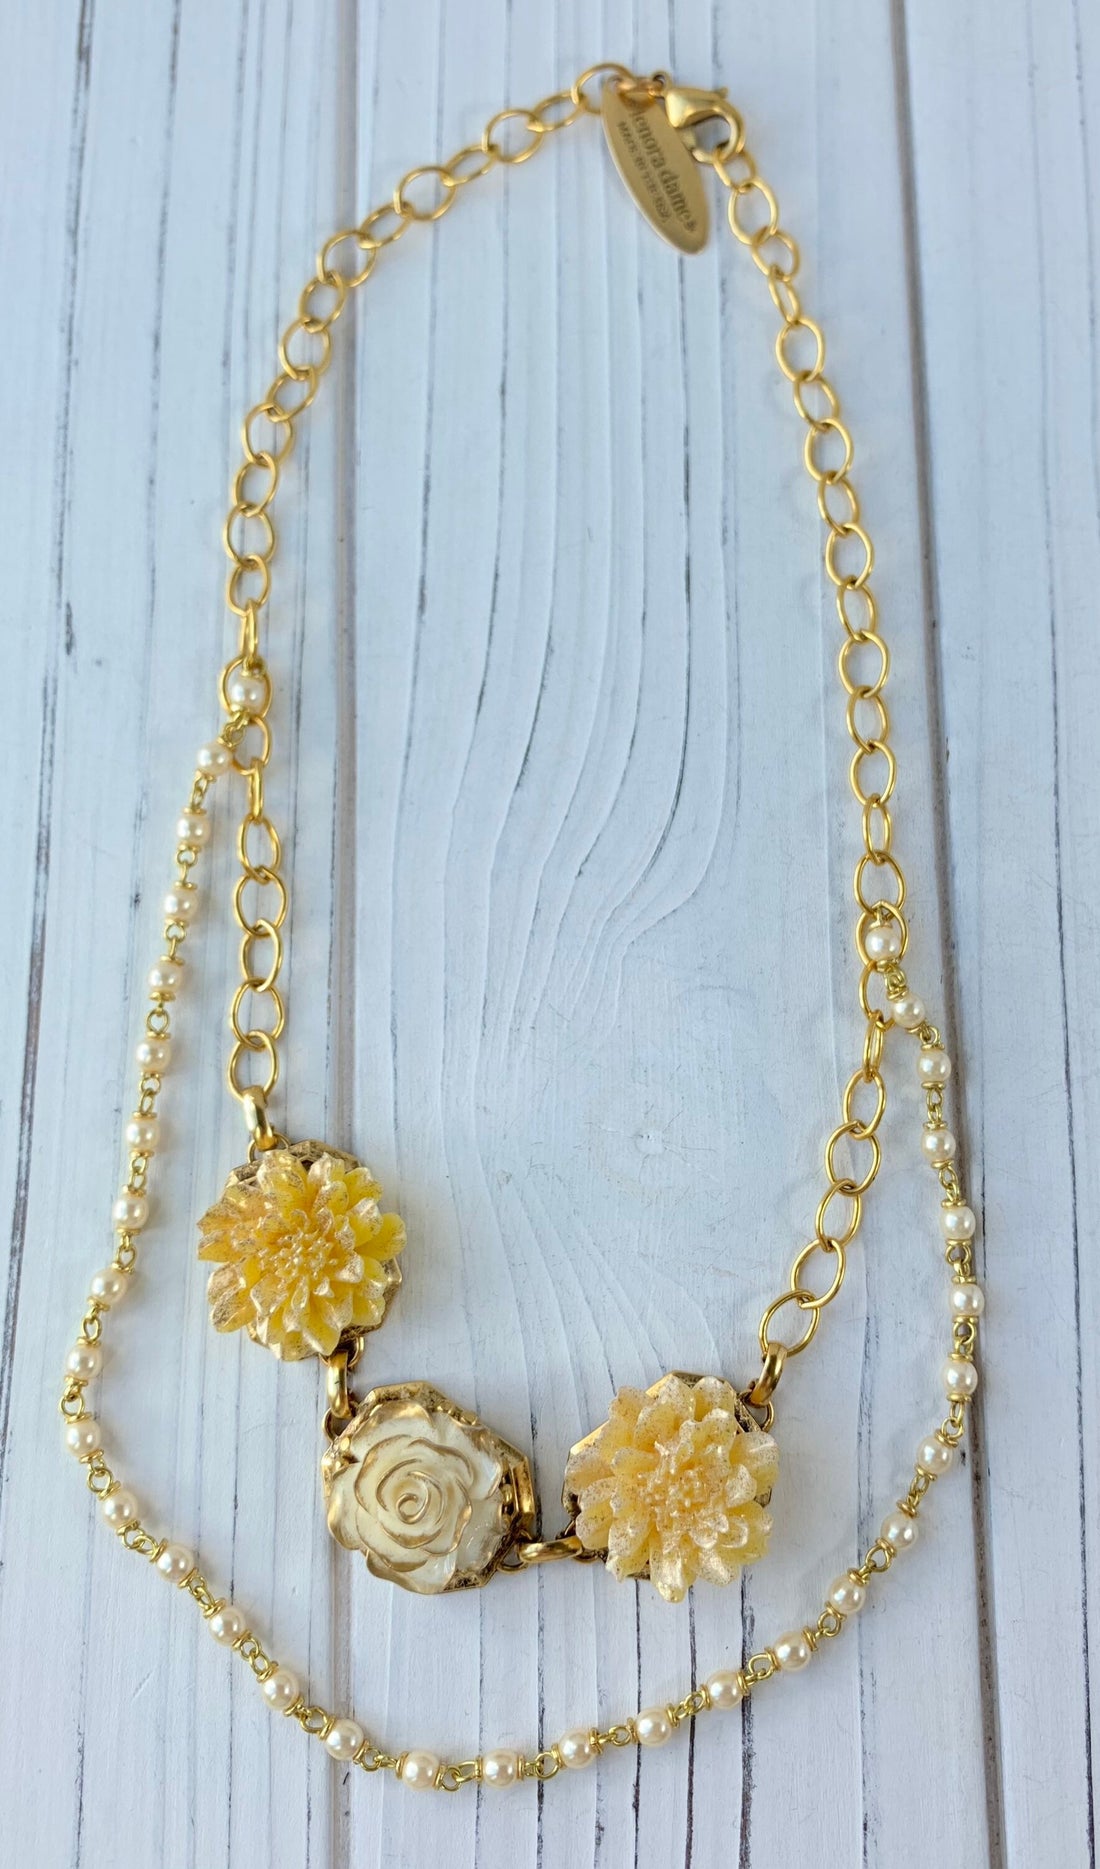 Lenora Dame Buttercup Swag Necklace